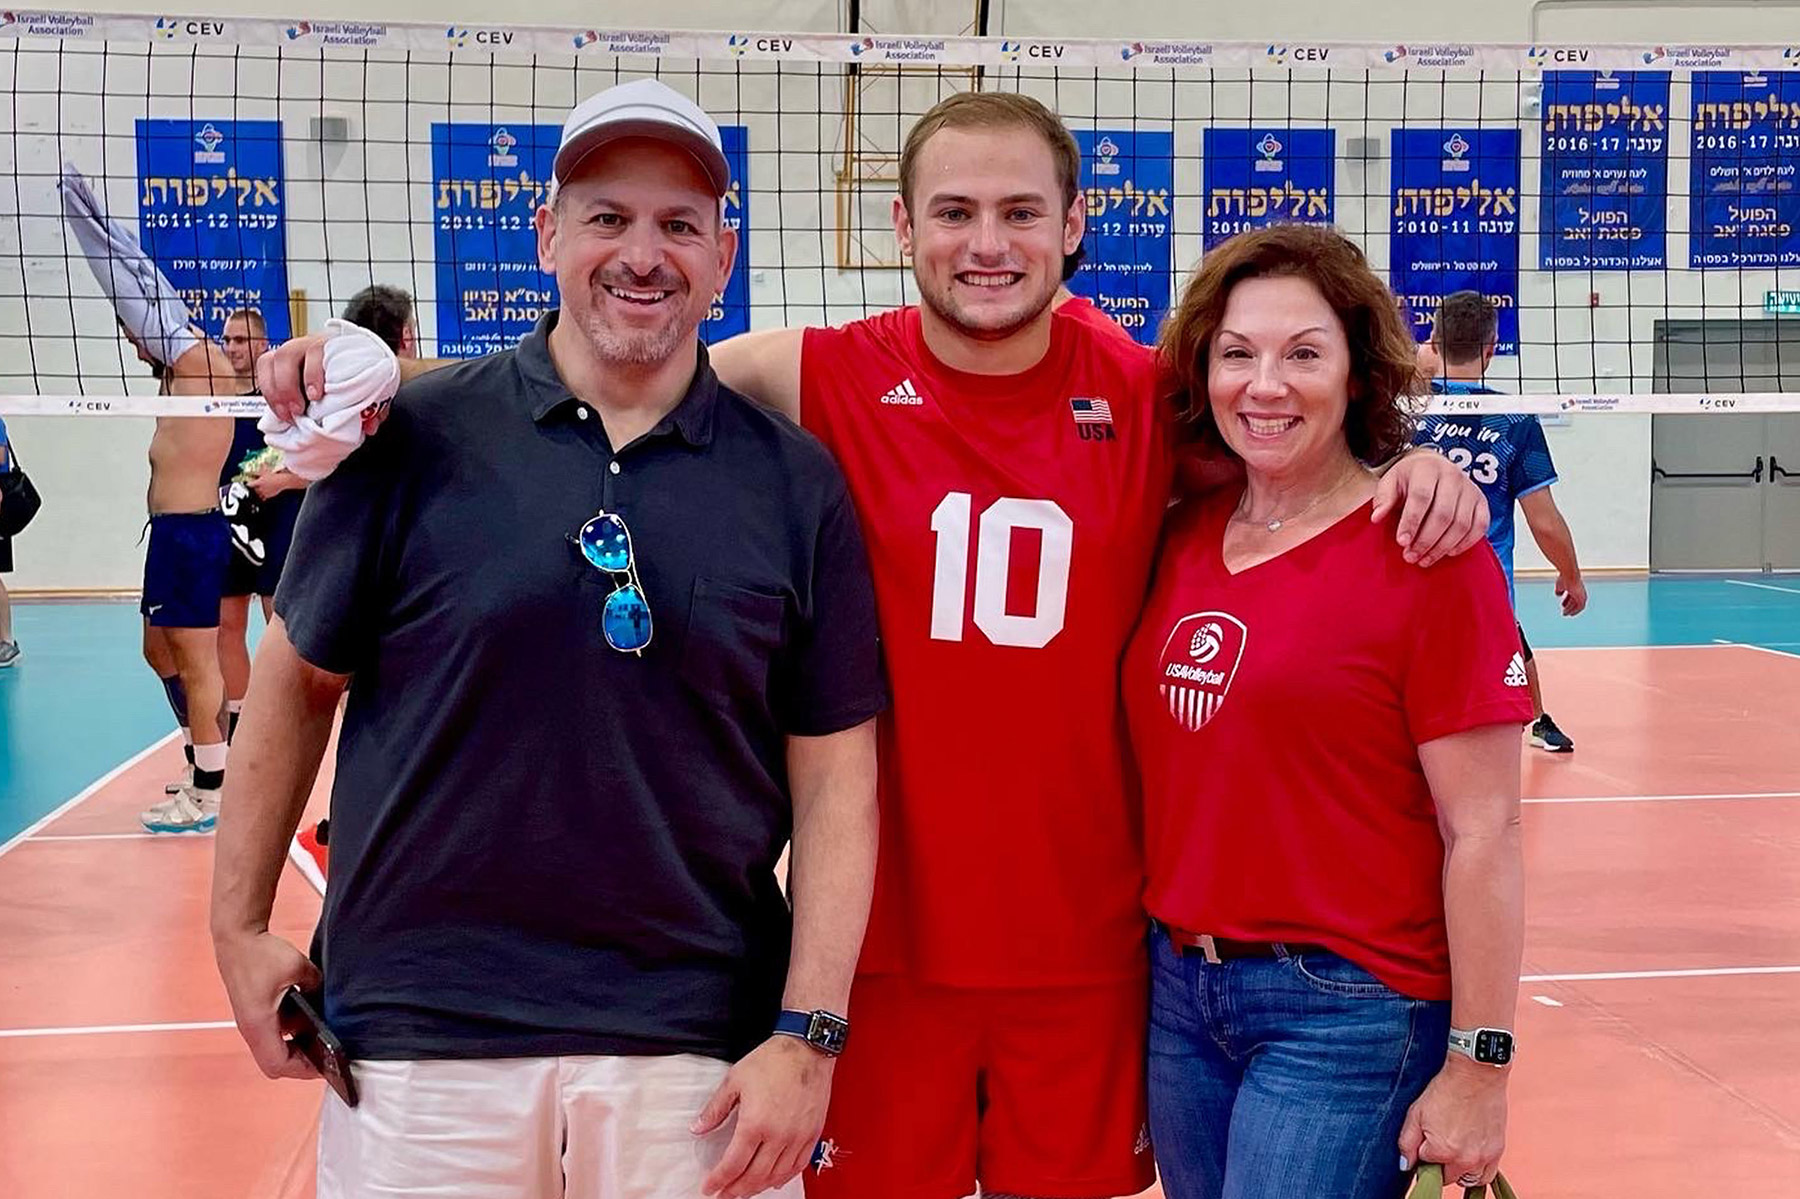 Jake Kaplan (center) with his father, Jeff, and mother, Erin, at the 21st Maccabiah Games